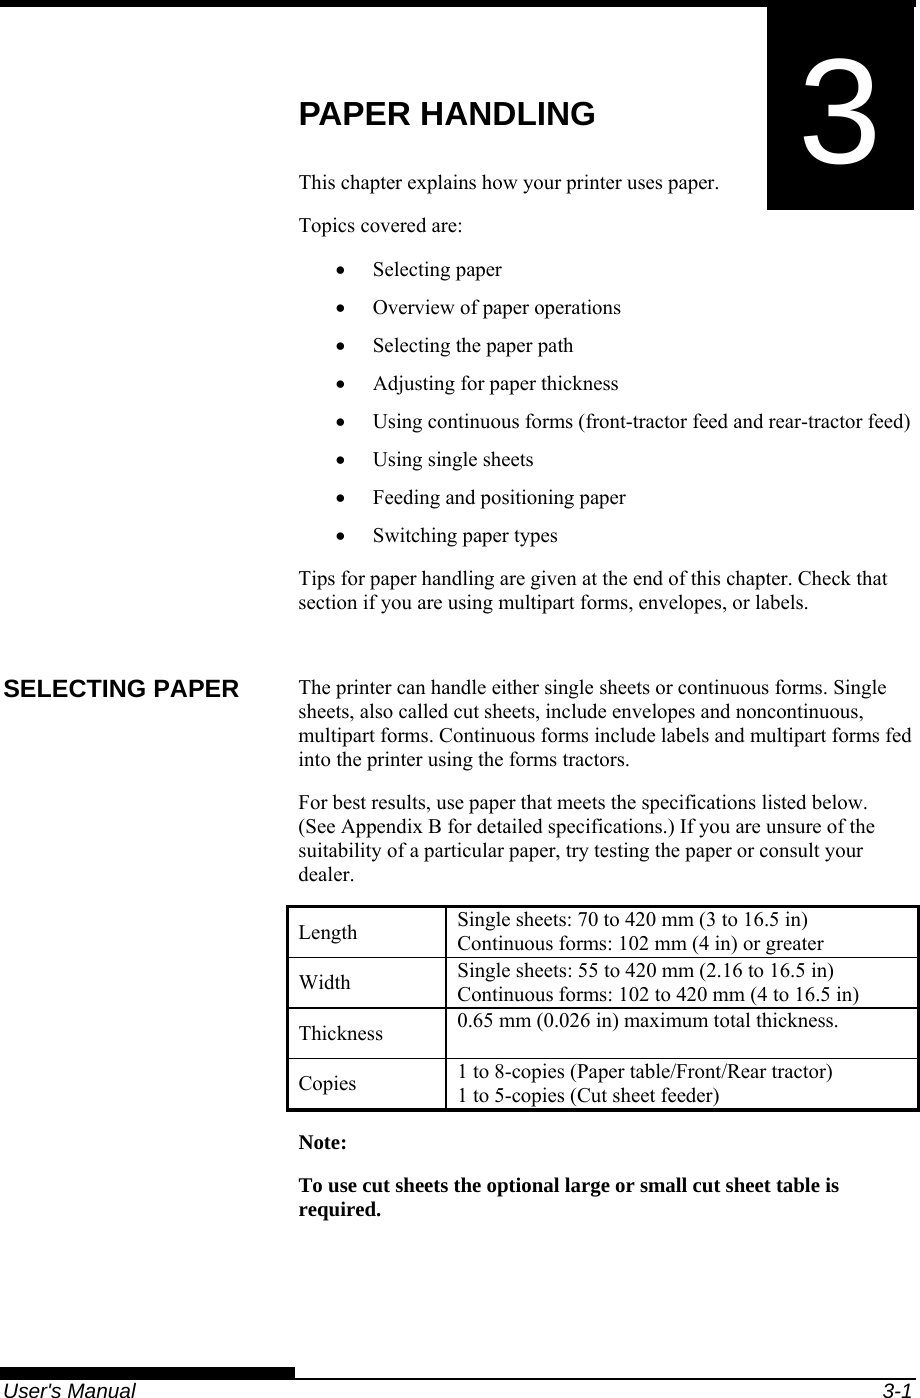   User&apos;s Manual  3-1 3 CHAPTER 3  PAPER HANDLING PAPER HANDLING This chapter explains how your printer uses paper. Topics covered are: • Selecting paper •  Overview of paper operations •  Selecting the paper path •  Adjusting for paper thickness •  Using continuous forms (front-tractor feed and rear-tractor feed) • Using single sheets •  Feeding and positioning paper • Switching paper types Tips for paper handling are given at the end of this chapter. Check that section if you are using multipart forms, envelopes, or labels.  The printer can handle either single sheets or continuous forms. Single sheets, also called cut sheets, include envelopes and noncontinuous, multipart forms. Continuous forms include labels and multipart forms fed into the printer using the forms tractors. For best results, use paper that meets the specifications listed below.  (See Appendix B for detailed specifications.) If you are unsure of the suitability of a particular paper, try testing the paper or consult your dealer. Length  Single sheets: 70 to 420 mm (3 to 16.5 in) Continuous forms: 102 mm (4 in) or greater Width  Single sheets: 55 to 420 mm (2.16 to 16.5 in) Continuous forms: 102 to 420 mm (4 to 16.5 in) Thickness  0.65 mm (0.026 in) maximum total thickness. Copies  1 to 8-copies (Paper table/Front/Rear tractor) 1 to 5-copies (Cut sheet feeder) Note: To use cut sheets the optional large or small cut sheet table is required.  SELECTING PAPER 